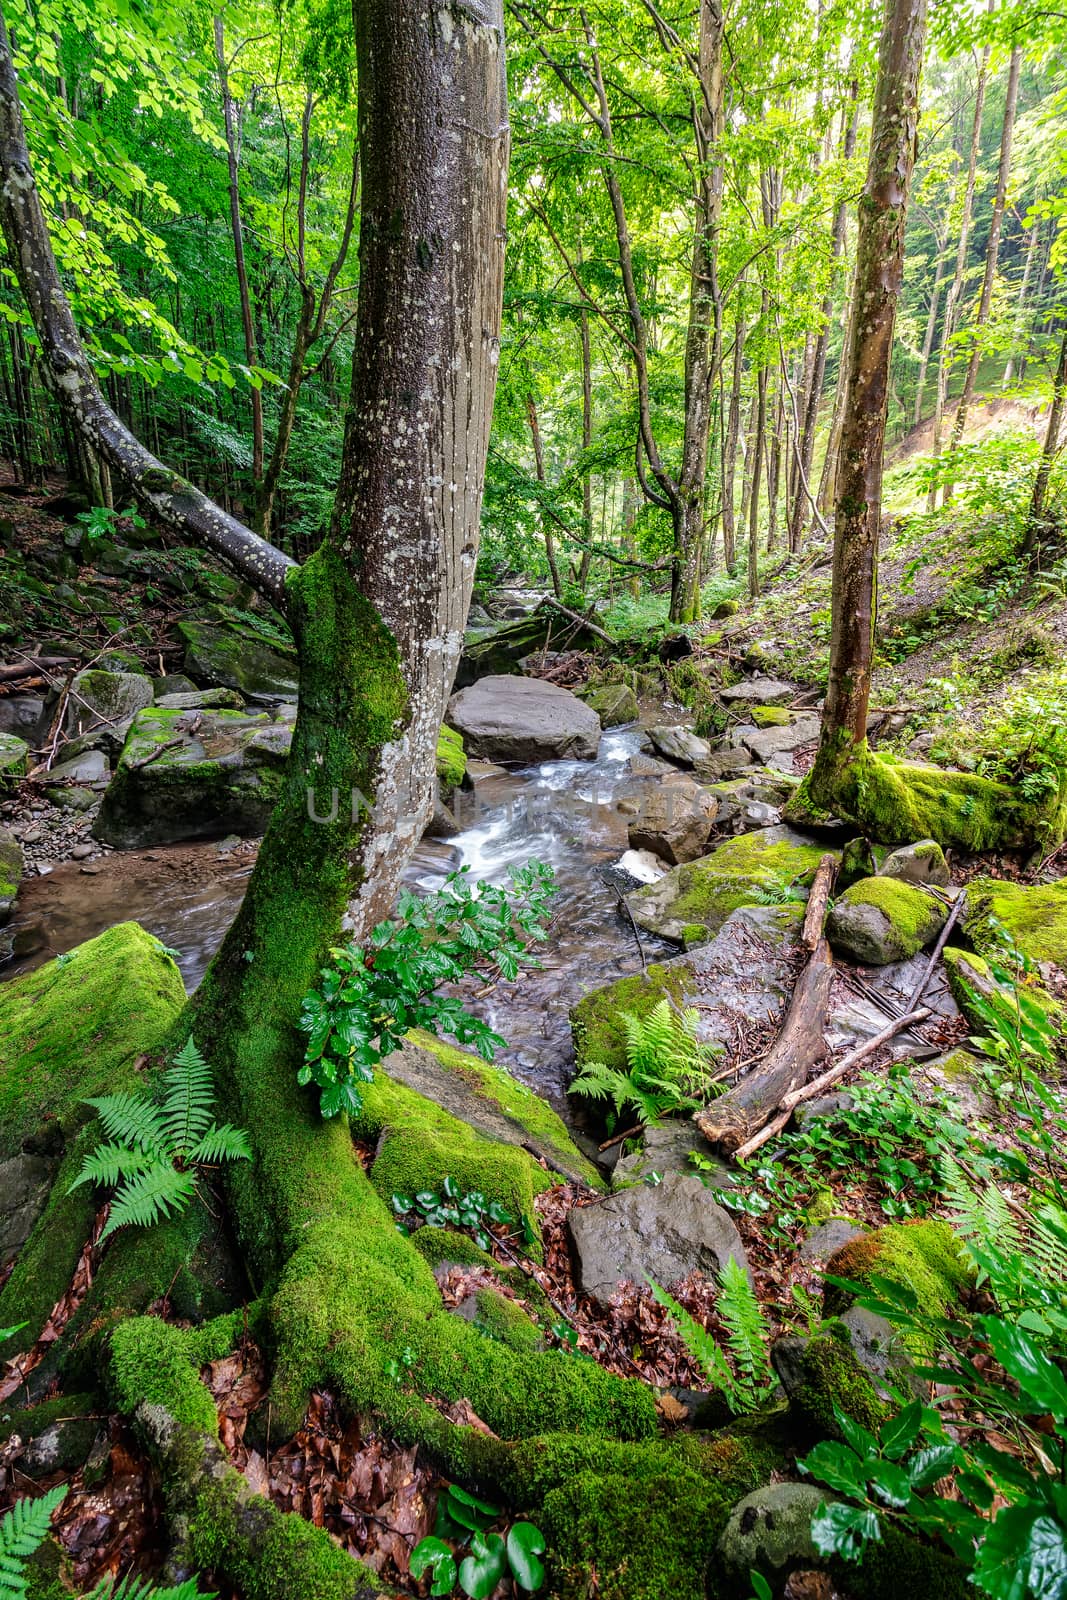 Curve tree with moss among the boulders on the forest stream bank